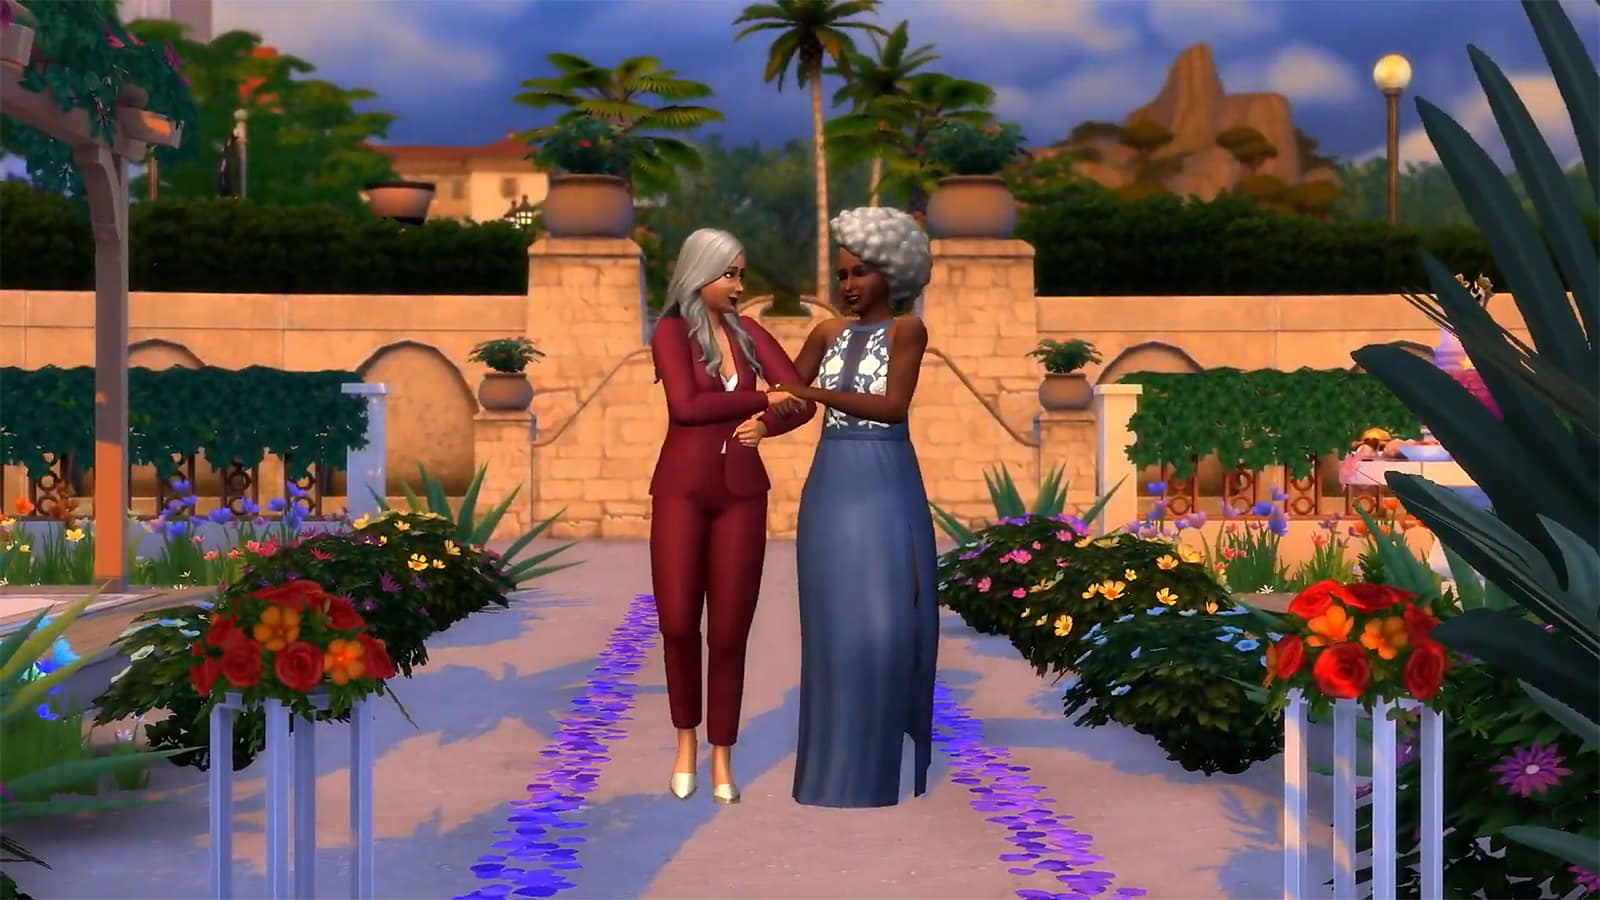 Dominique Umeh and Camille Soto, two NPCs in the trailer for My Wedding Stories